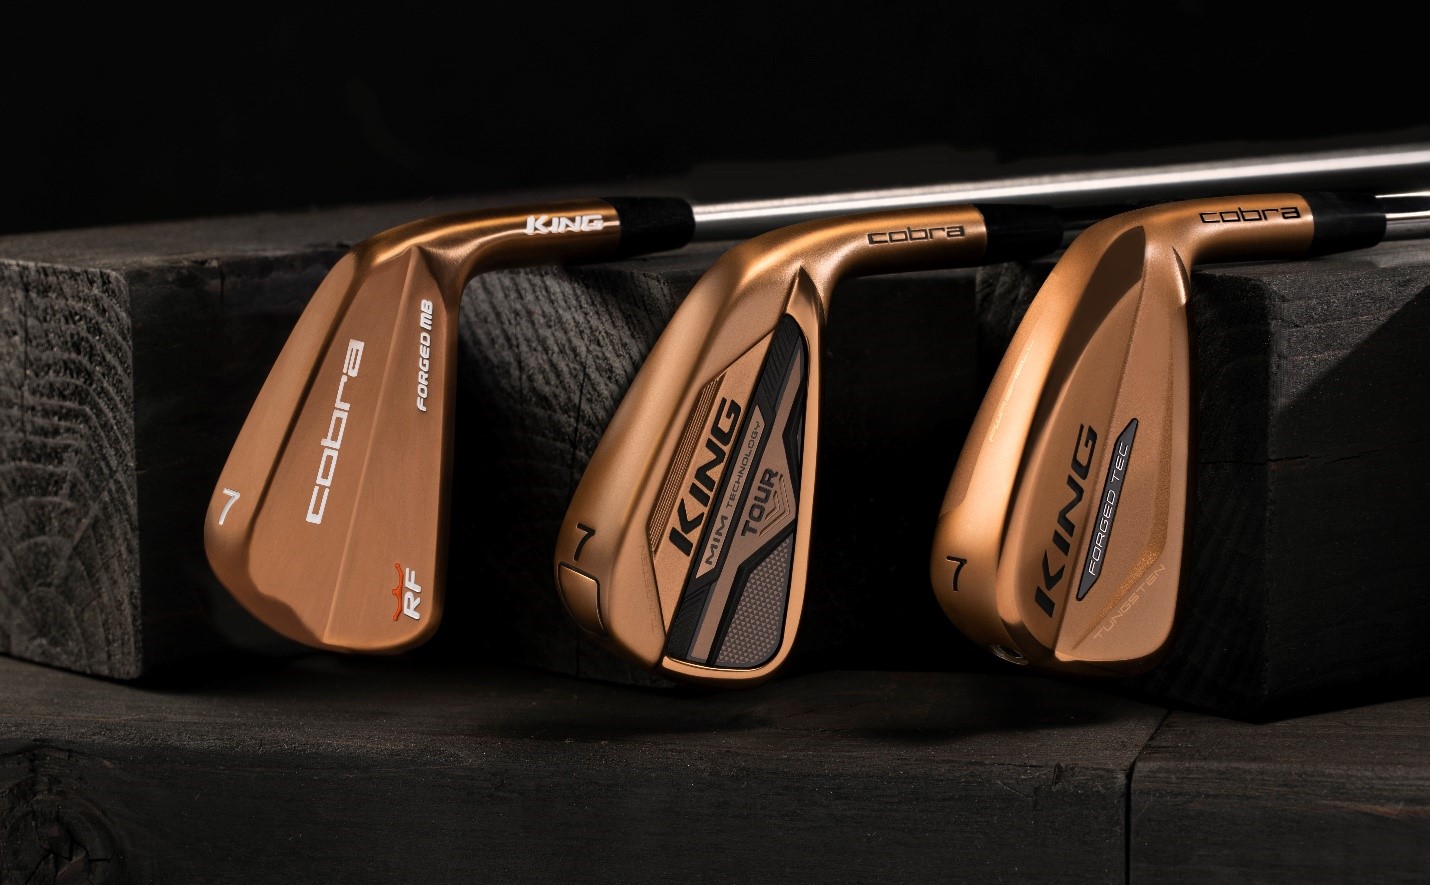 COBRA GOLF UNVEILS THE COPPER SERIES PLAYERS IRONS TO SATISFY THE MOST